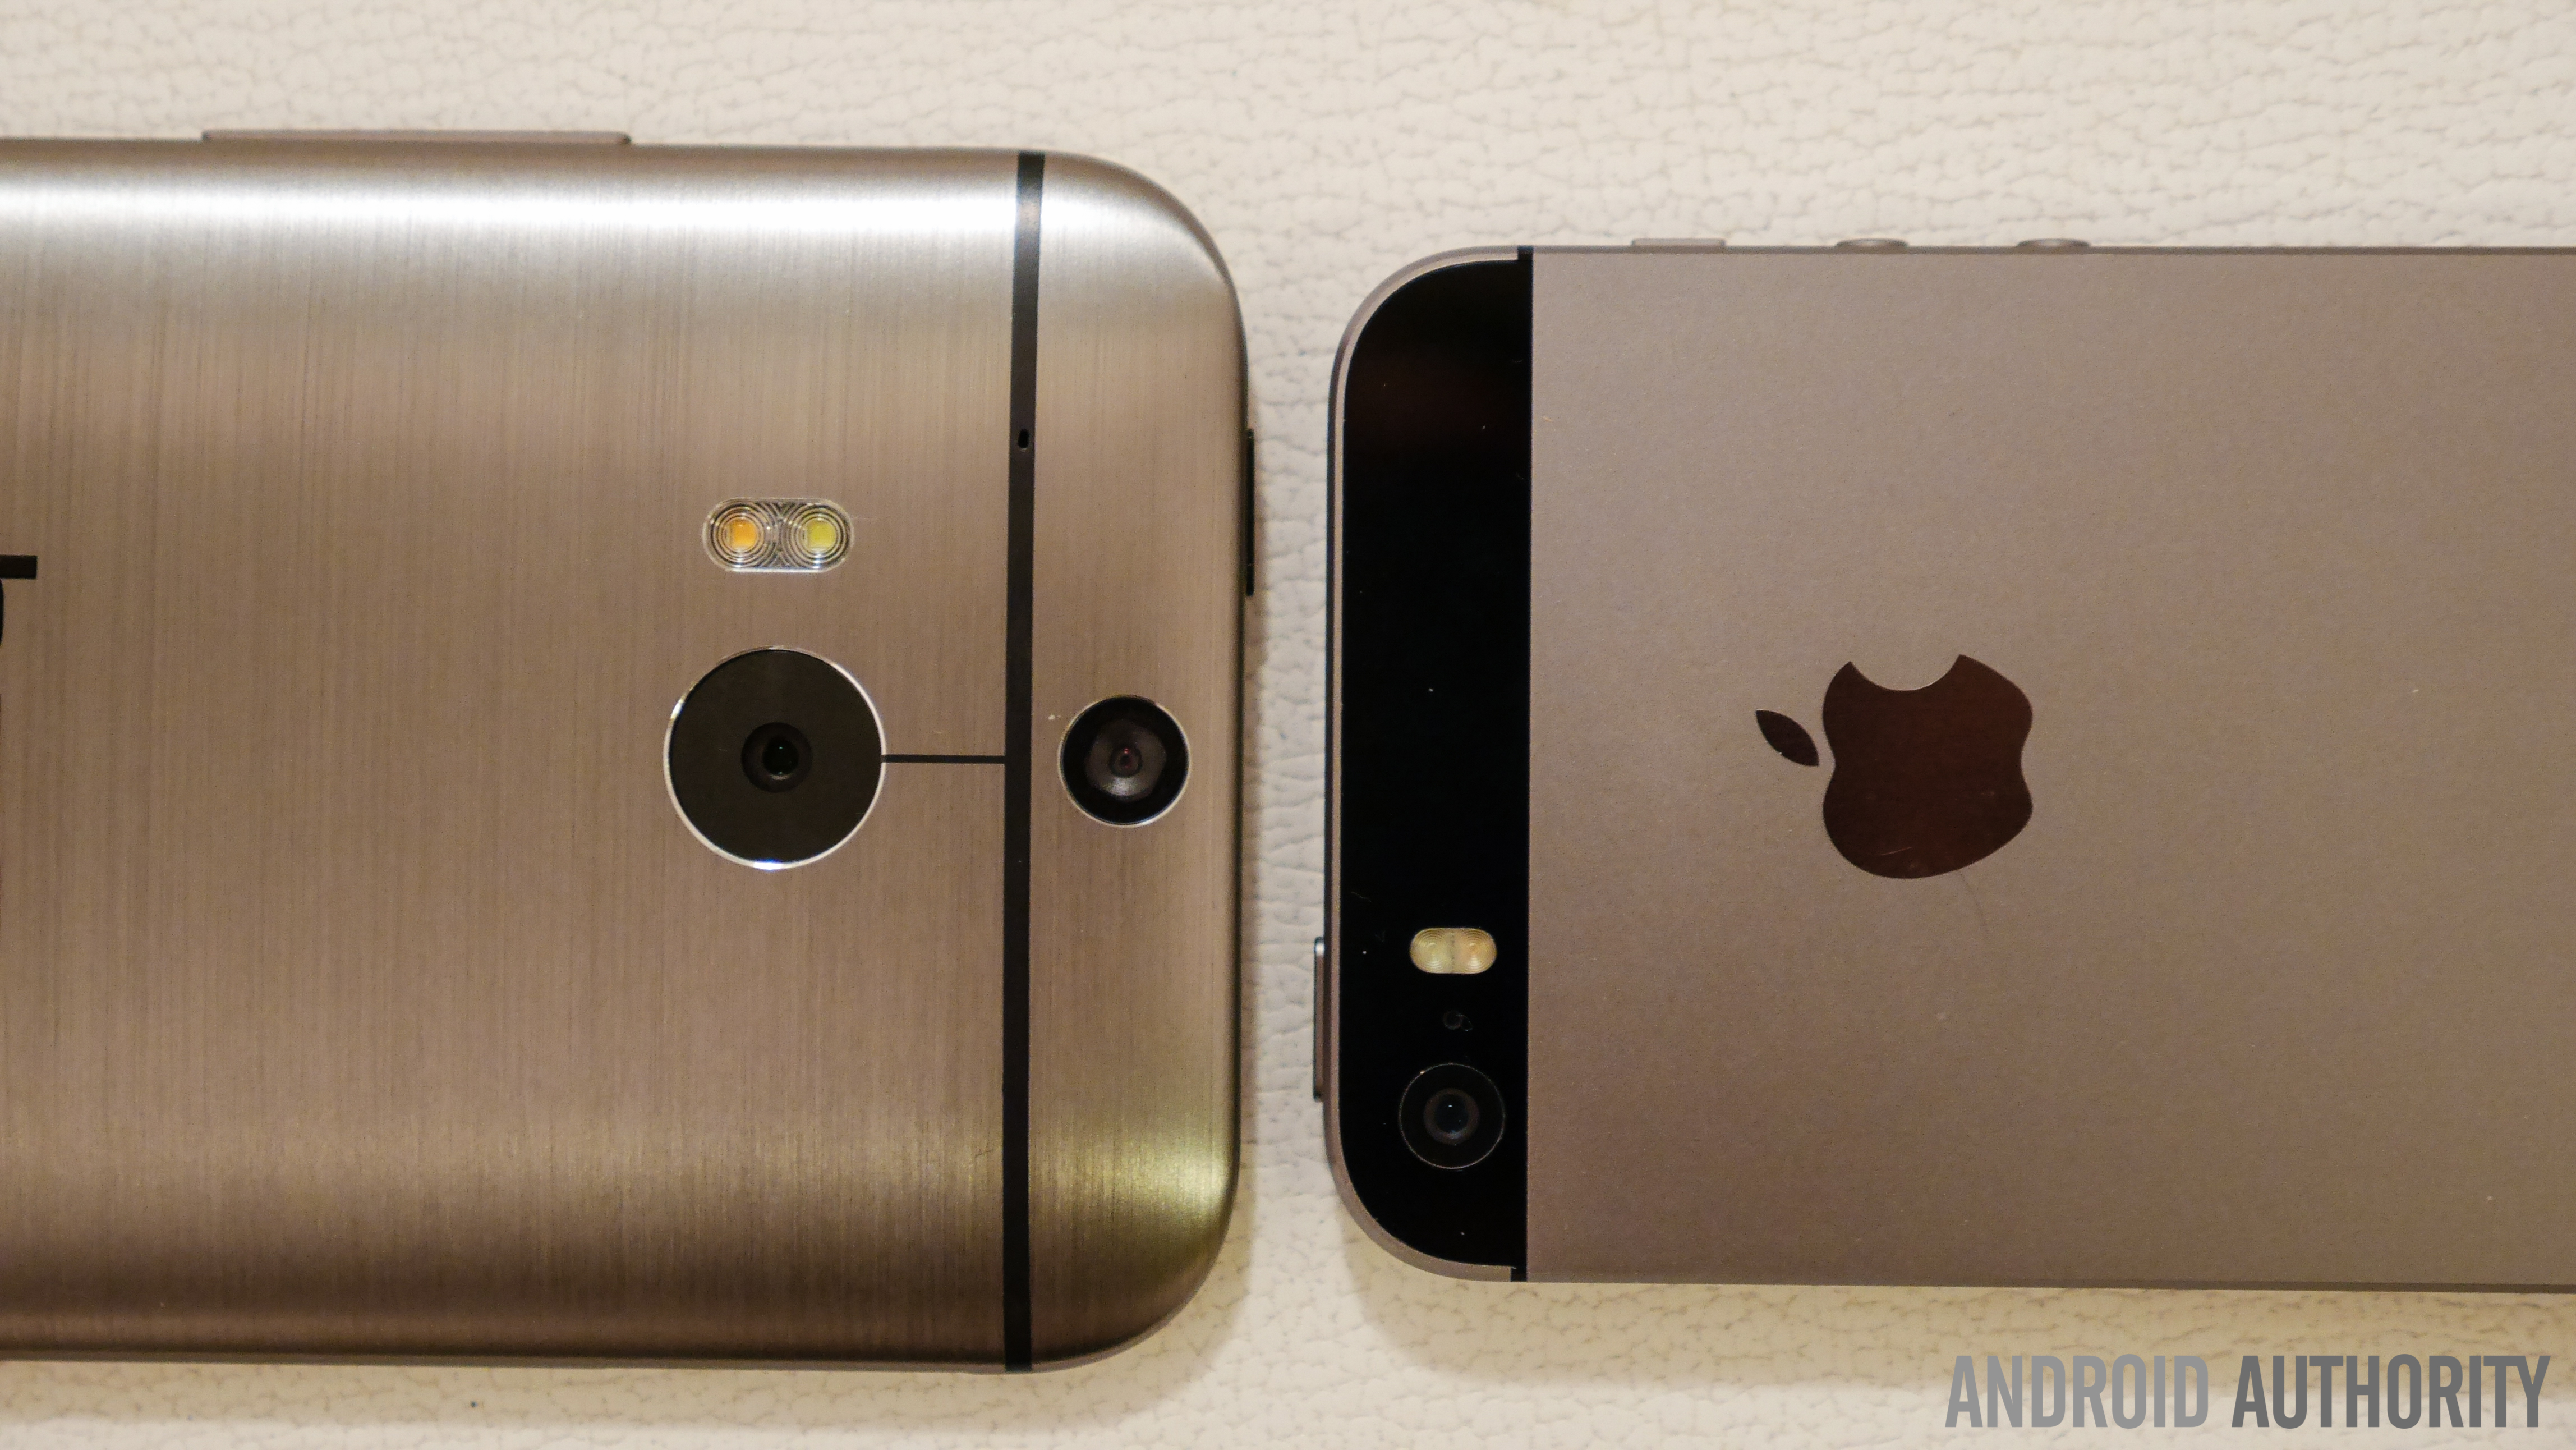 htc one m8 vs iphone 5s quick look aa (9 of 15)